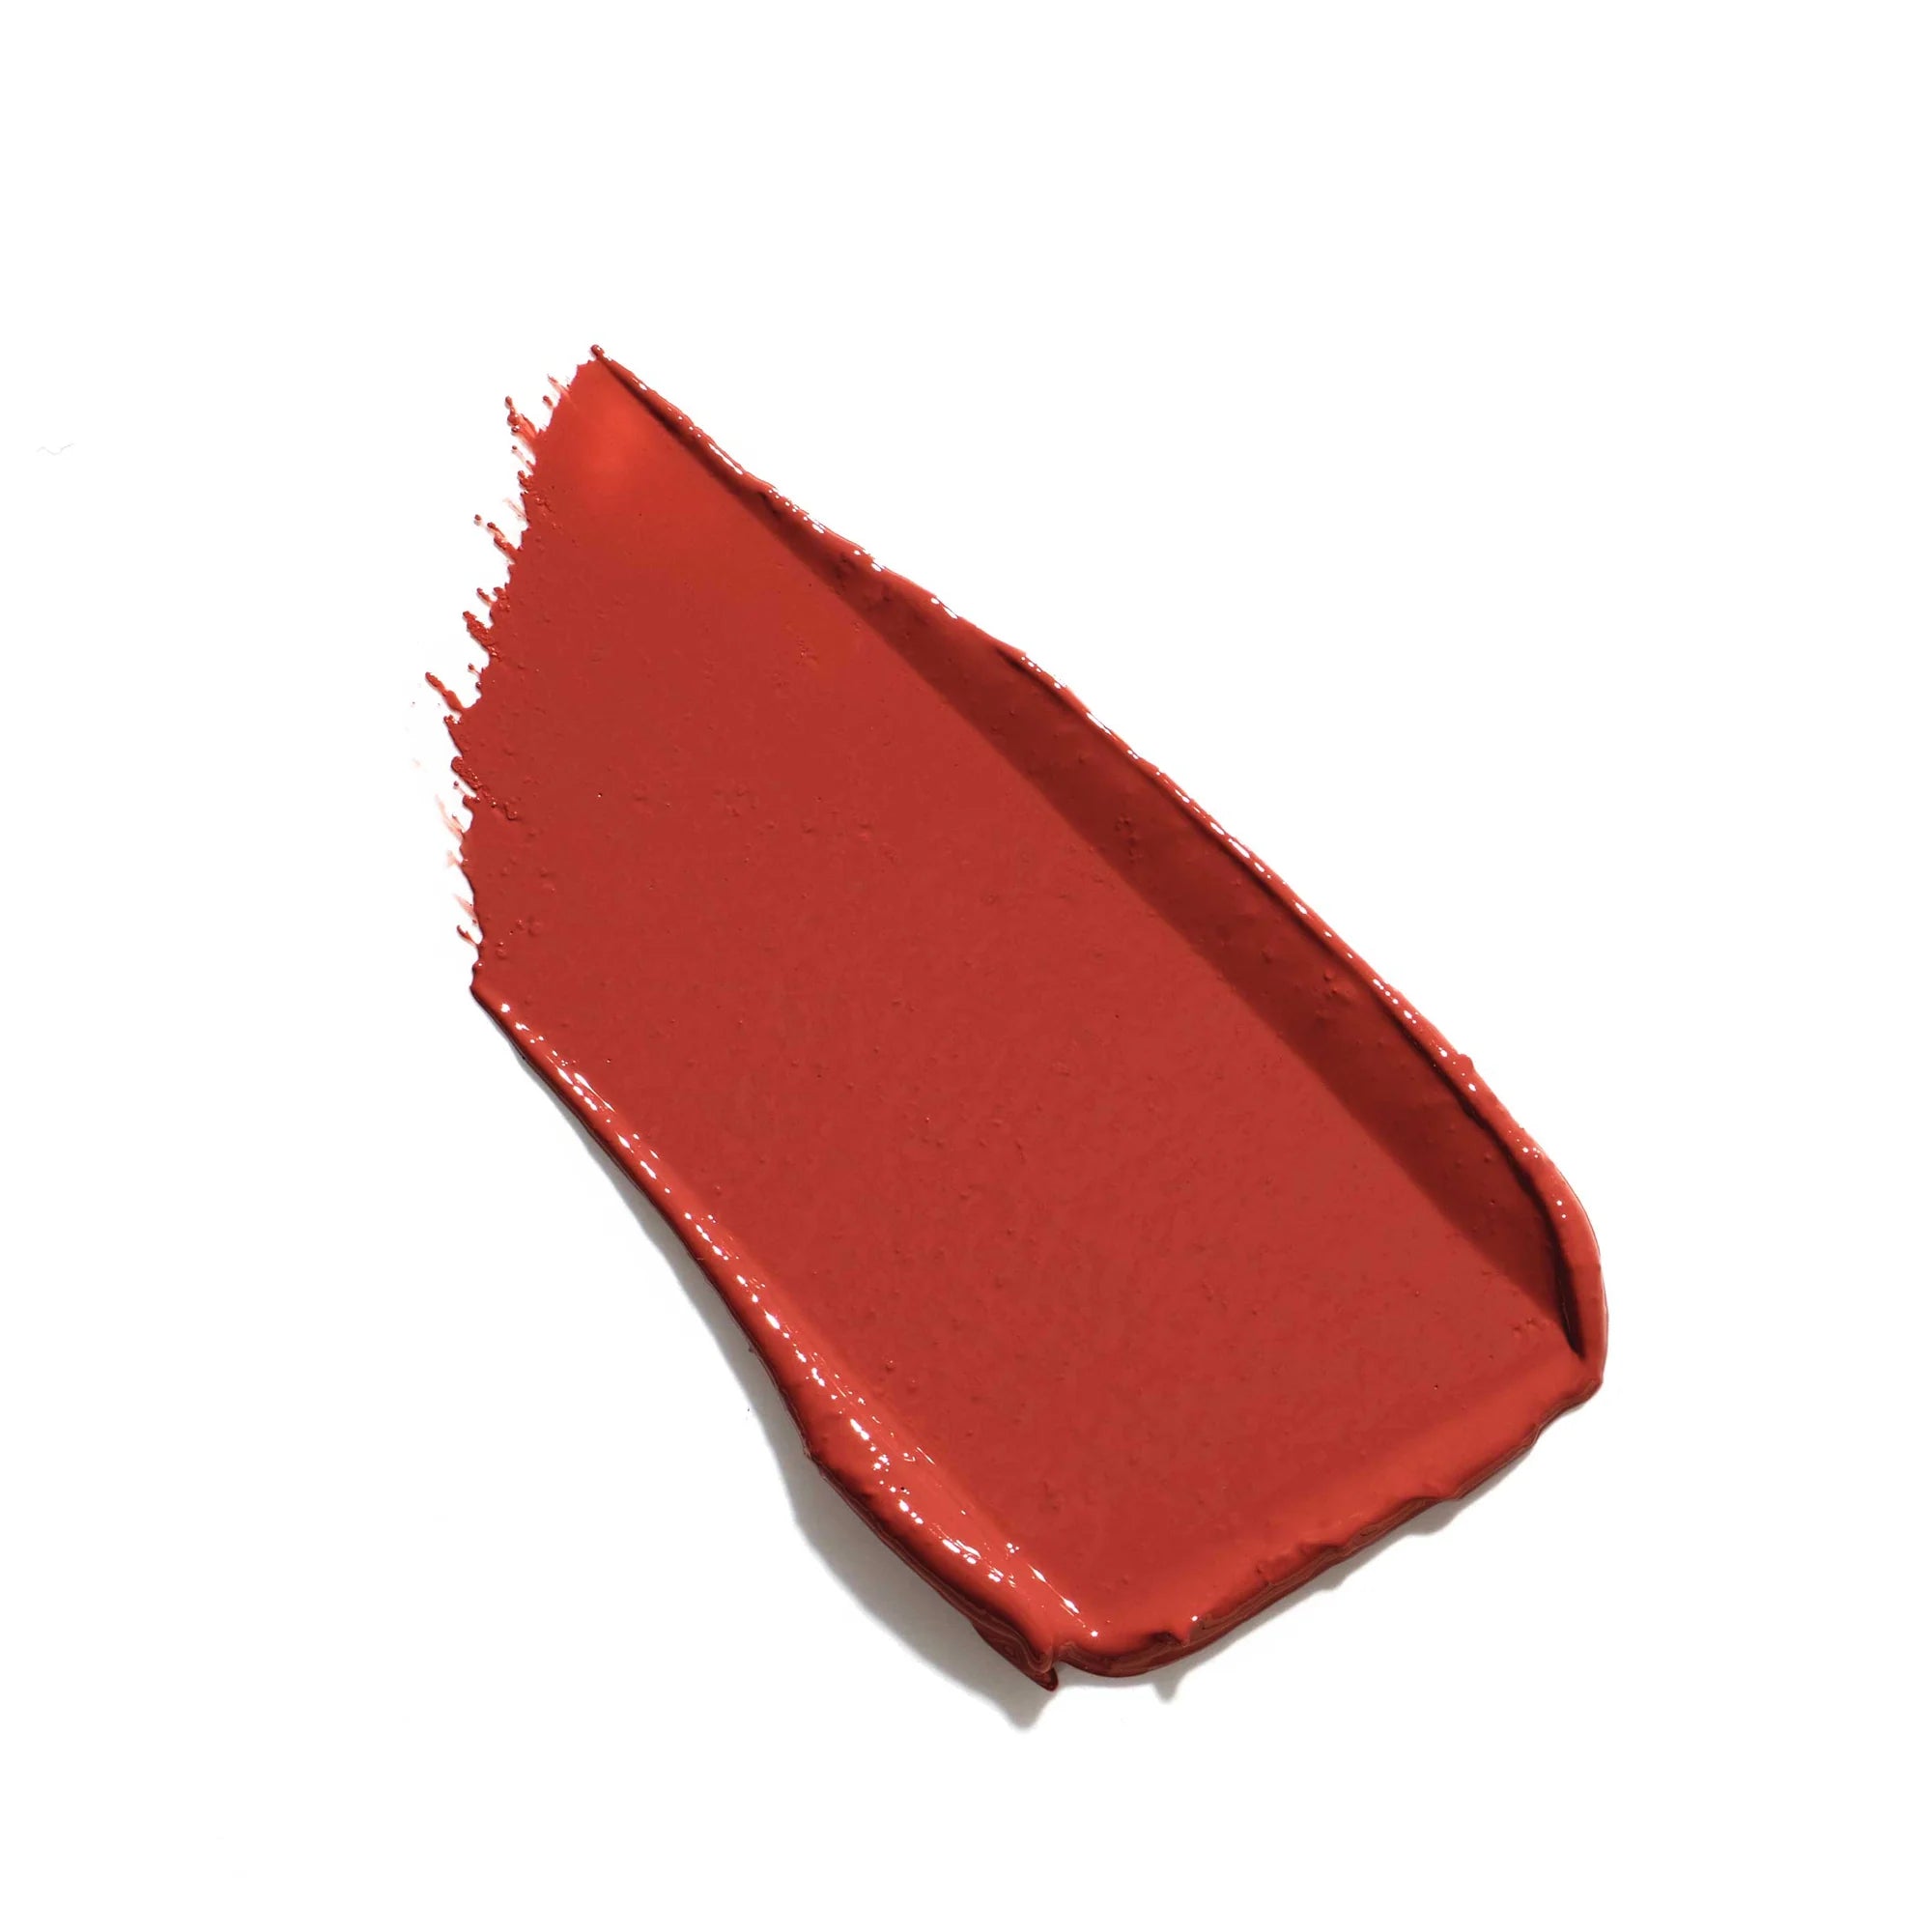 Jane Iredale ColorLuxe Hydrating Cream Lipstick - Scarlet